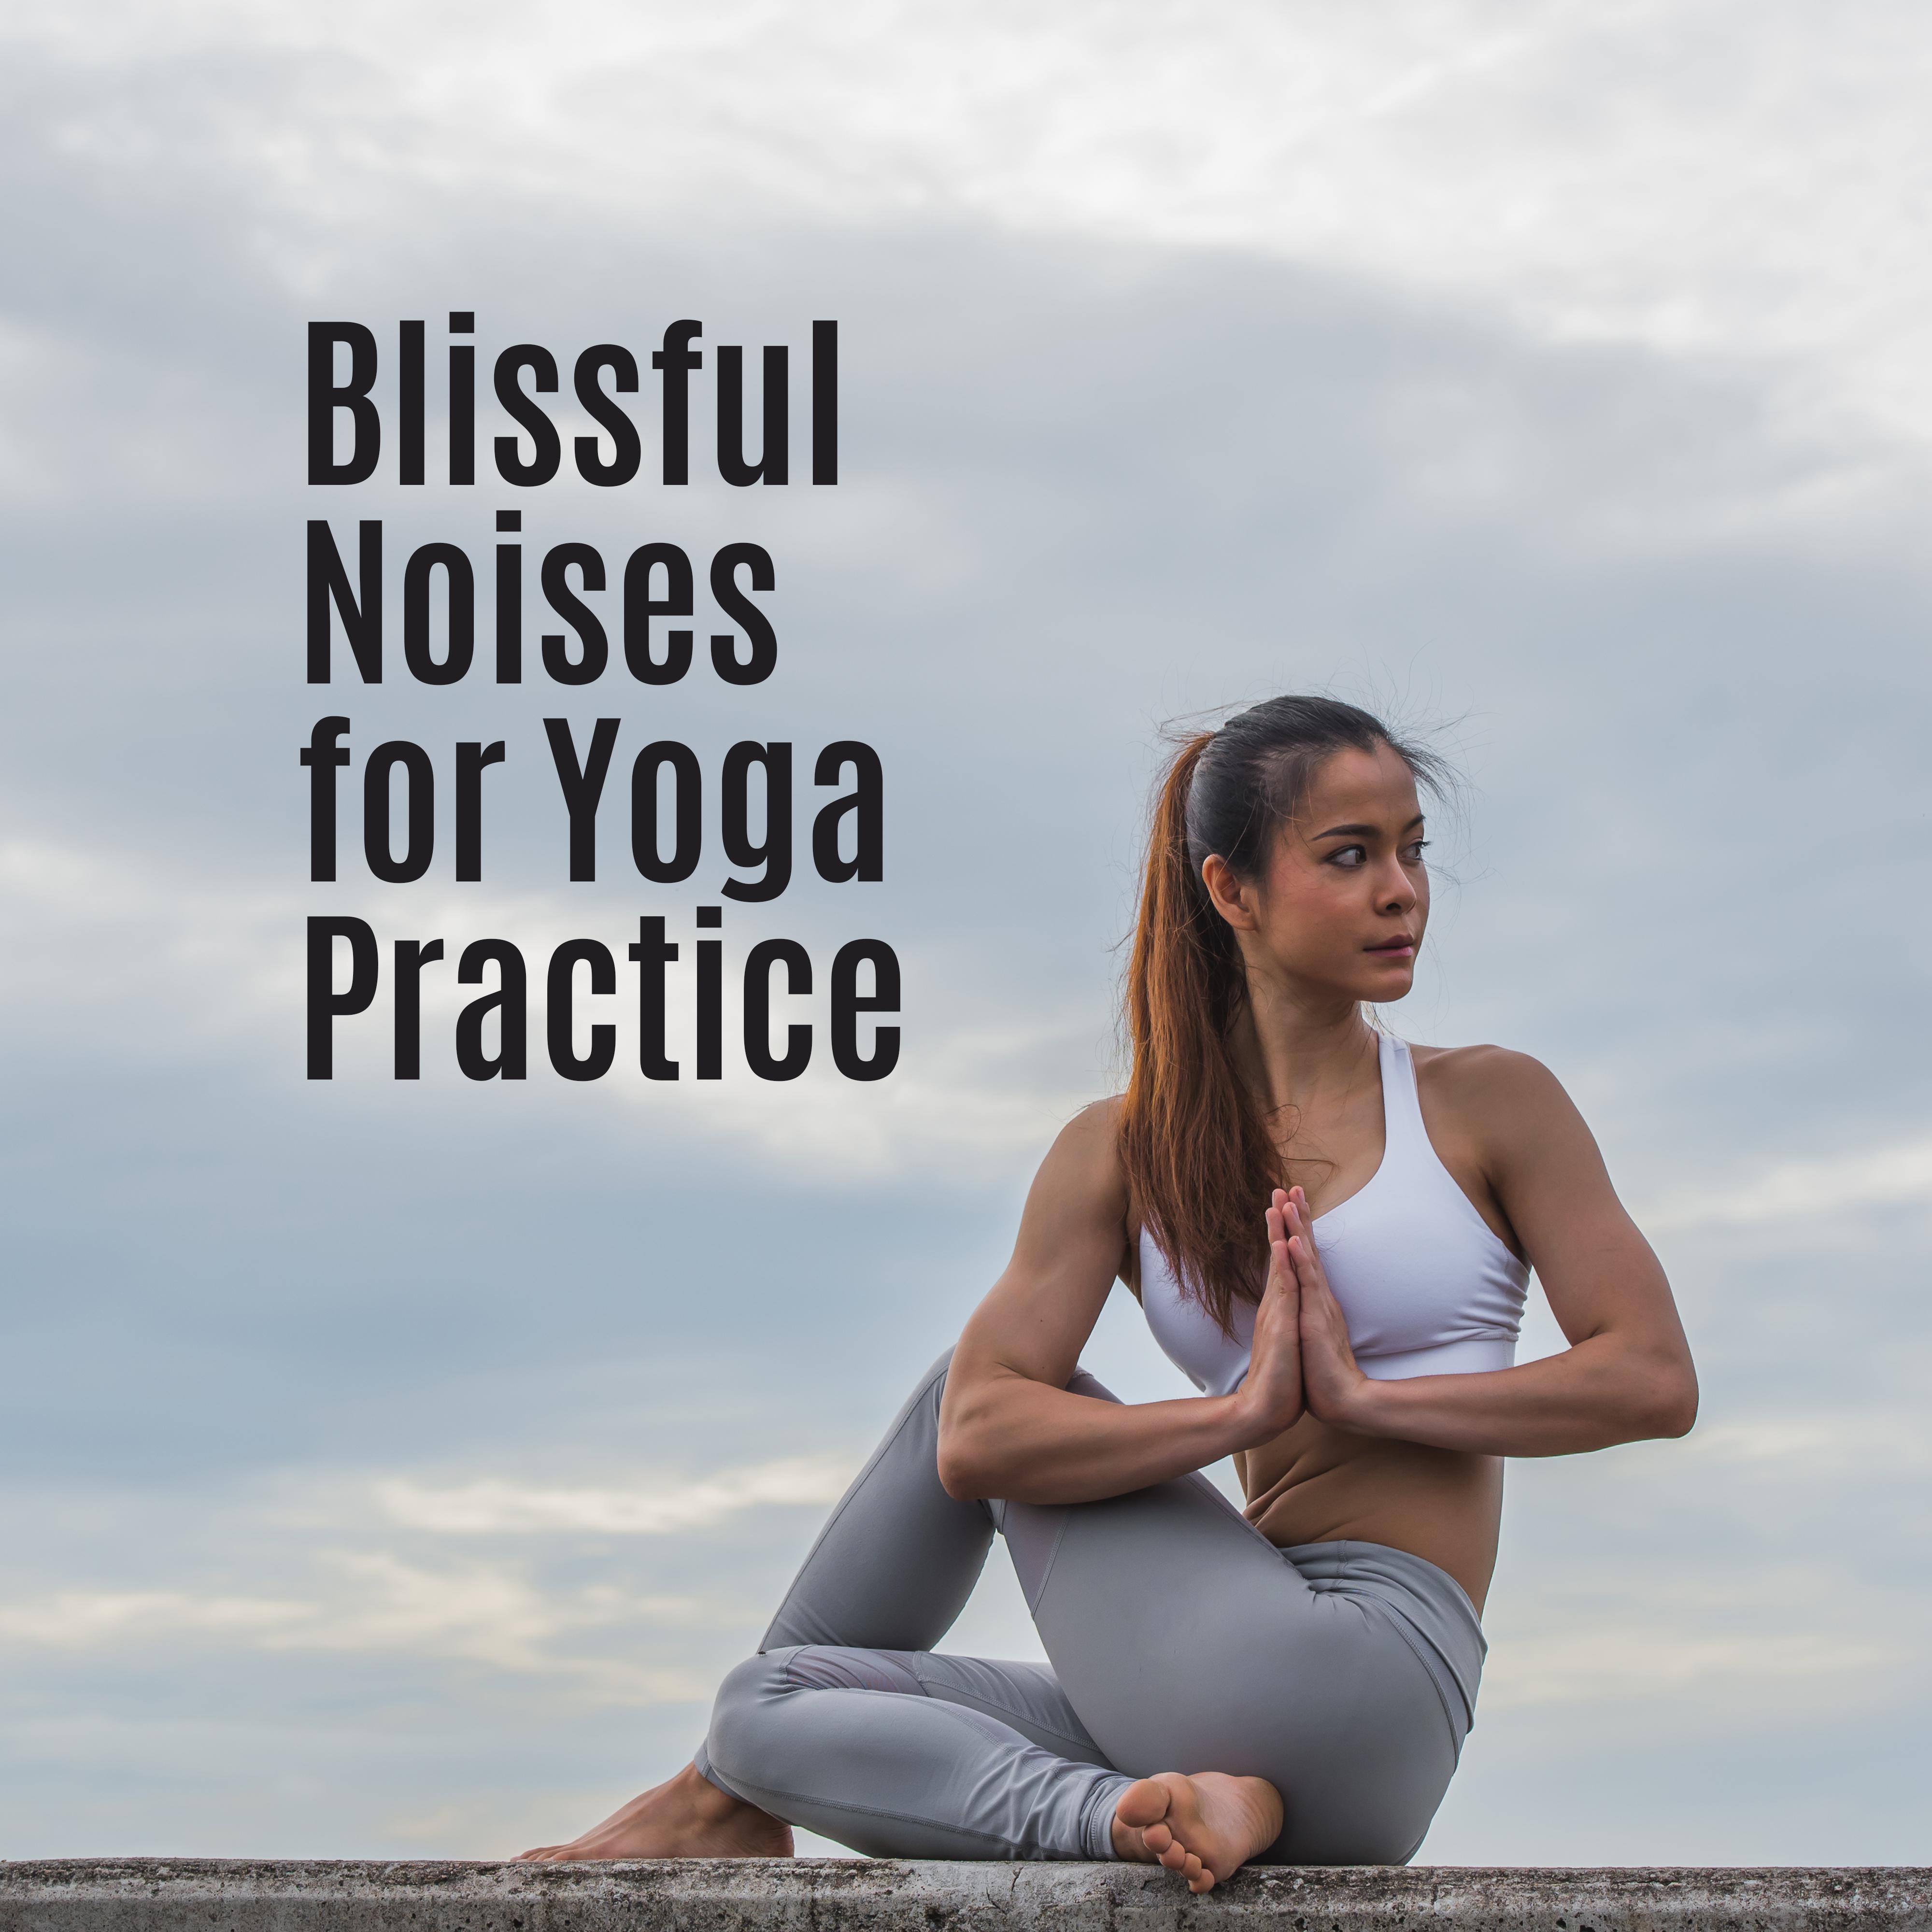 Blissful Noises for Yoga Practice: 2019 New Age Music Collection, Deep Ambient & Nature Songs for Meditation & Full Body & Mind Relaxation